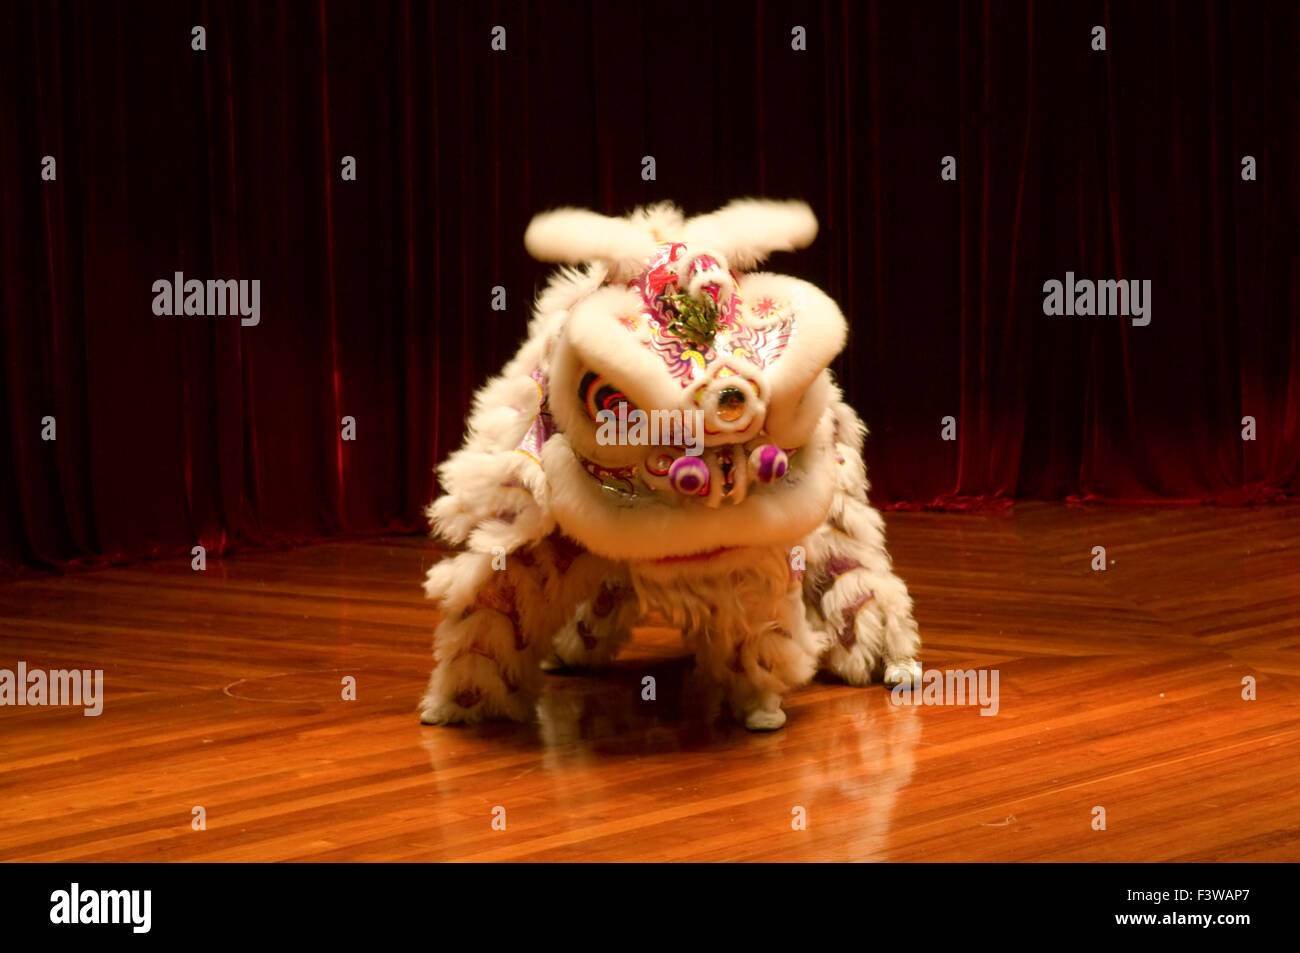 The traditional Chinese lion dance on stage Stock Photo